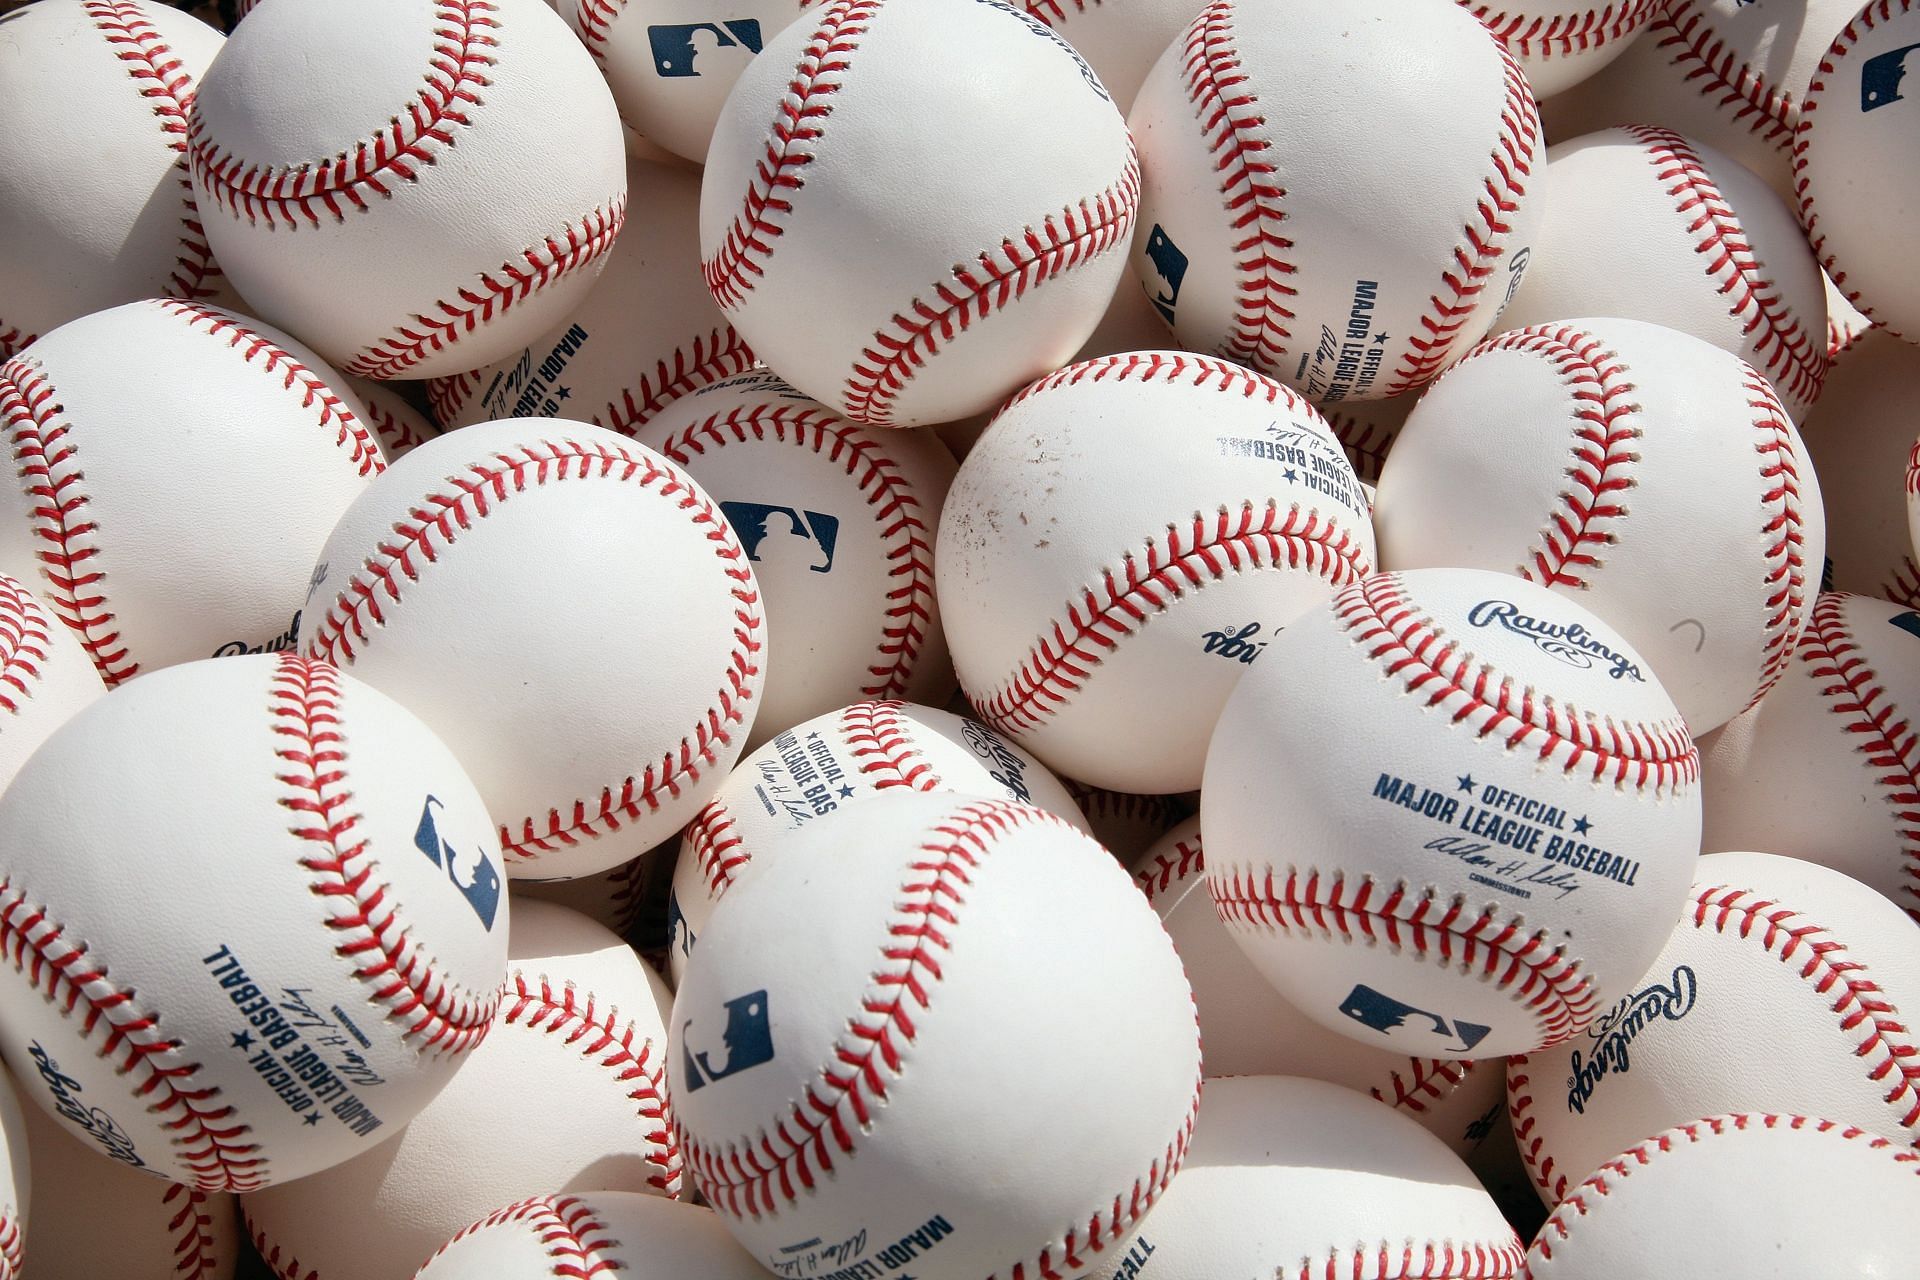 New York Yankees v Seattle Mariners: SEATTLE - SEPTEMBER 20: A general view of the official baseballs taken before the game between the New York Yankees and the Seattle Mariners on September 20, 2009, at Safeco Field in Seattle, Washington. (Photo by Otto Greule Jr/Getty Images)